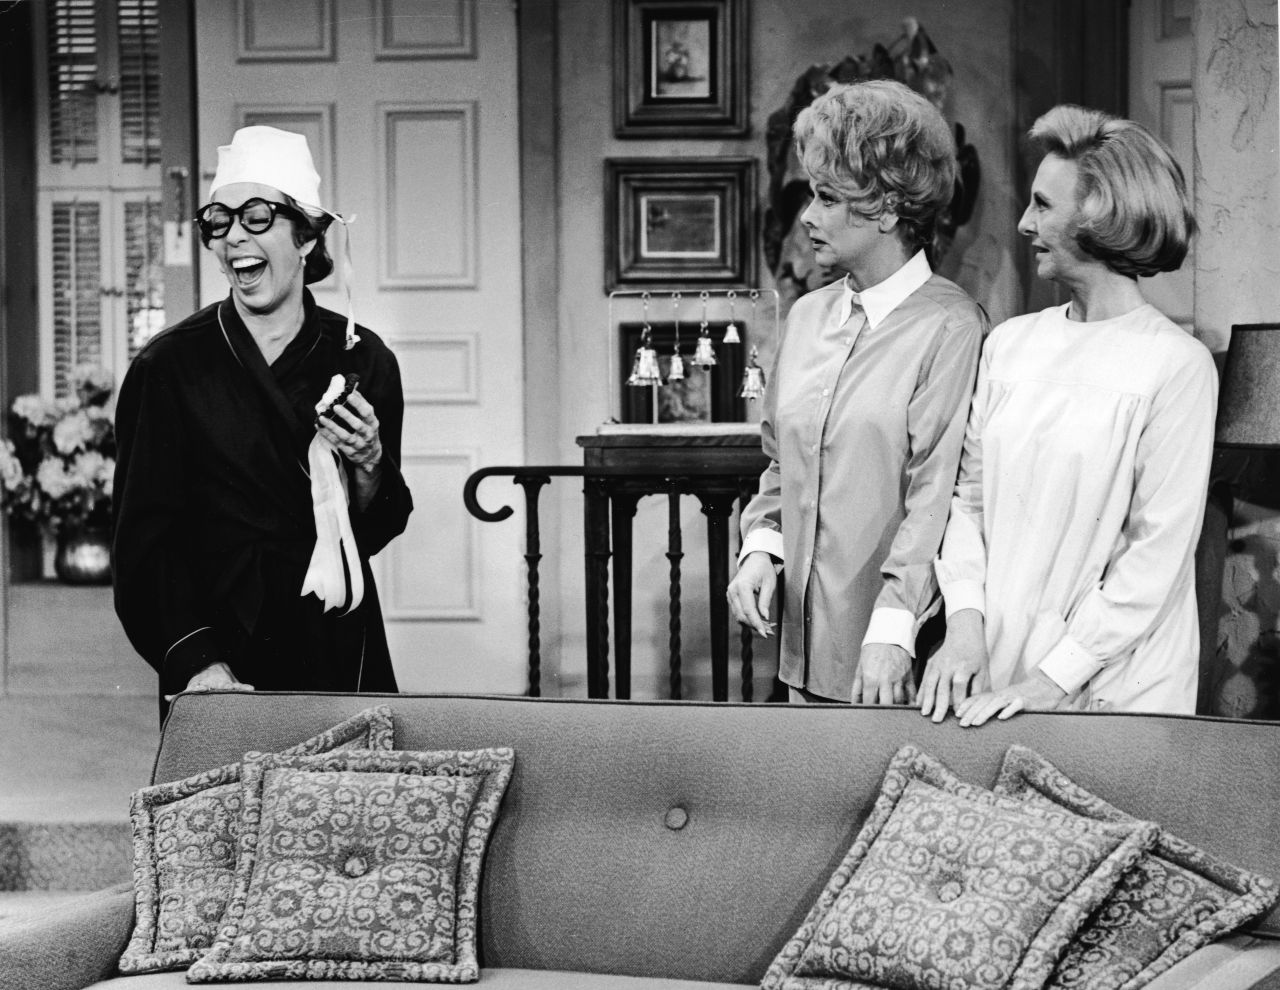 Burnett laughs while appearing with Lucille Ball, center, and Mary Jane Croft on a 1966 episode of "The Lucy Show."